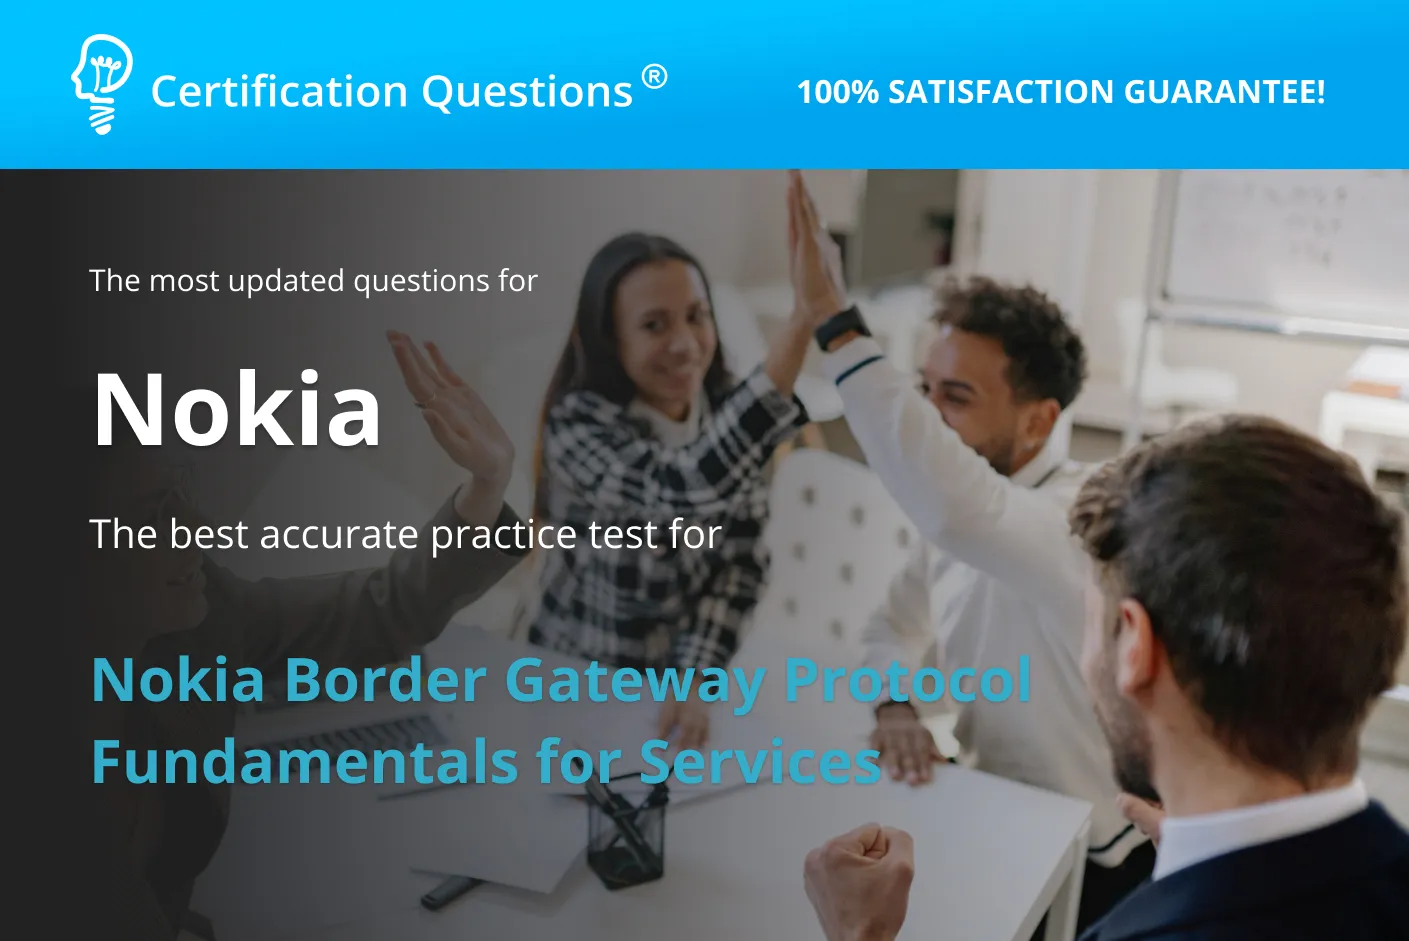 Here is image for the Nokia Border Gateway Protocol Fundamentals for Services practice test